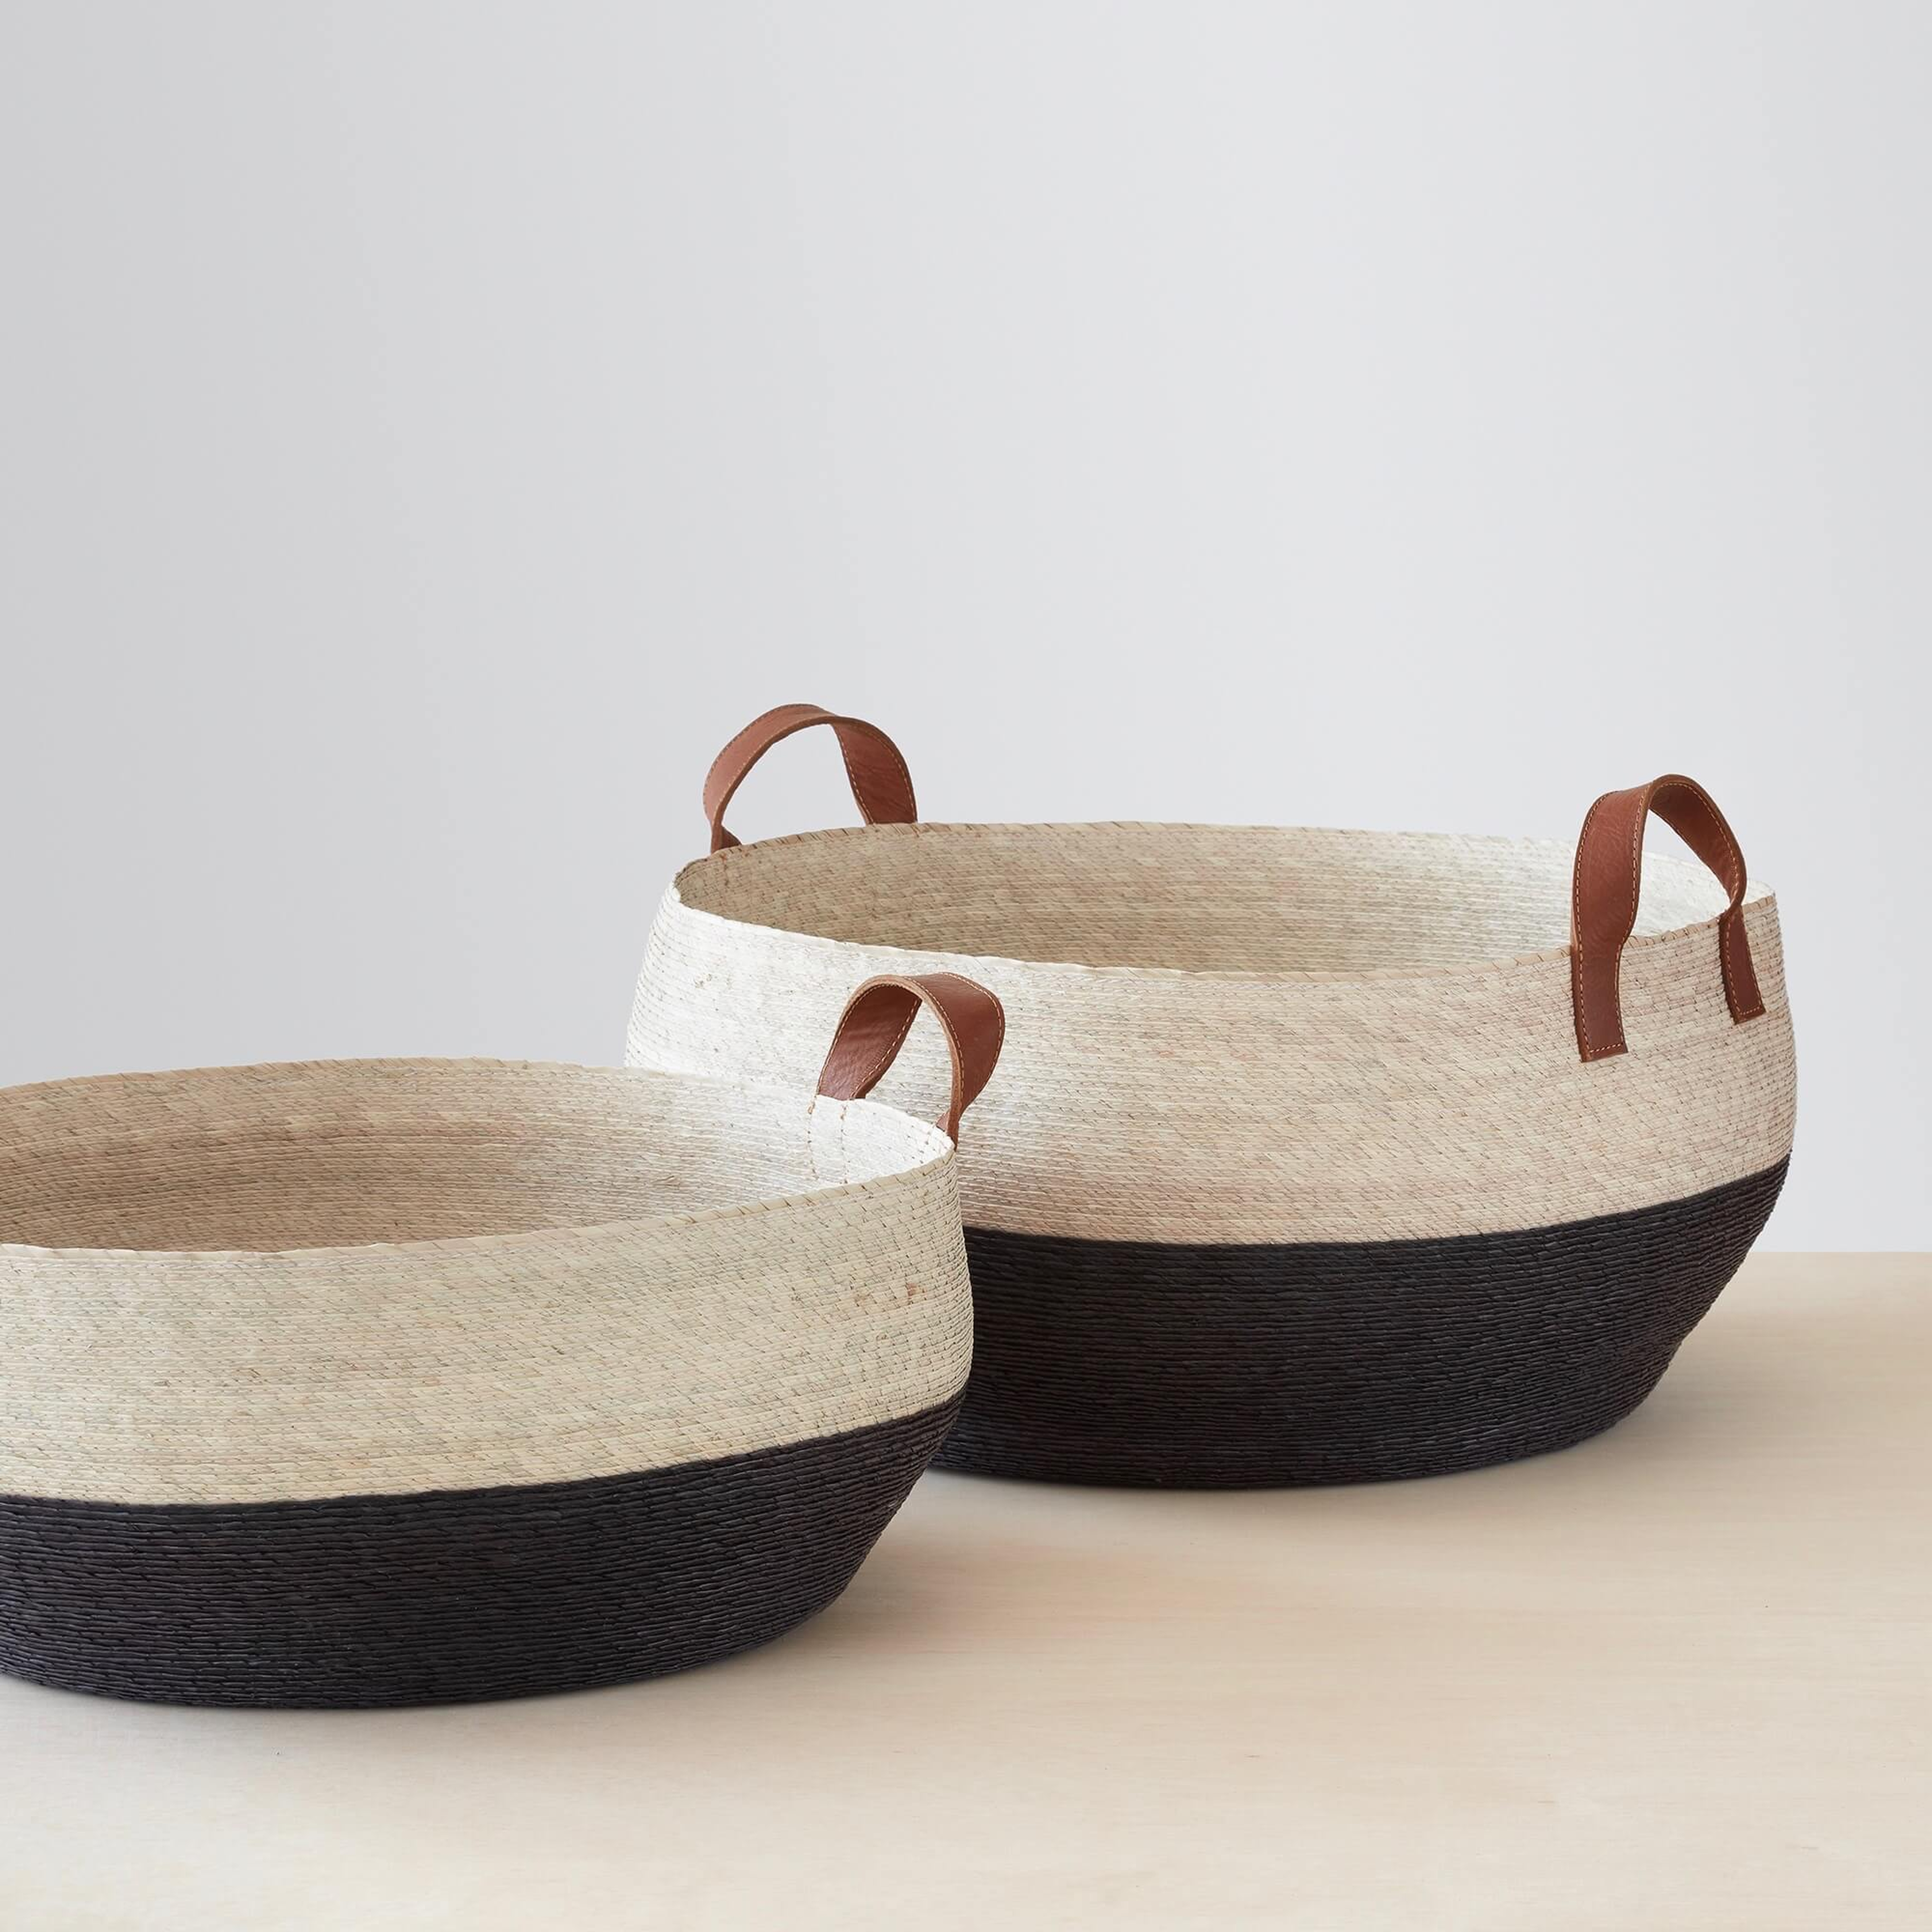 Mercado Floor Baskets - Black - Large By The Citizenry - The Citizenry